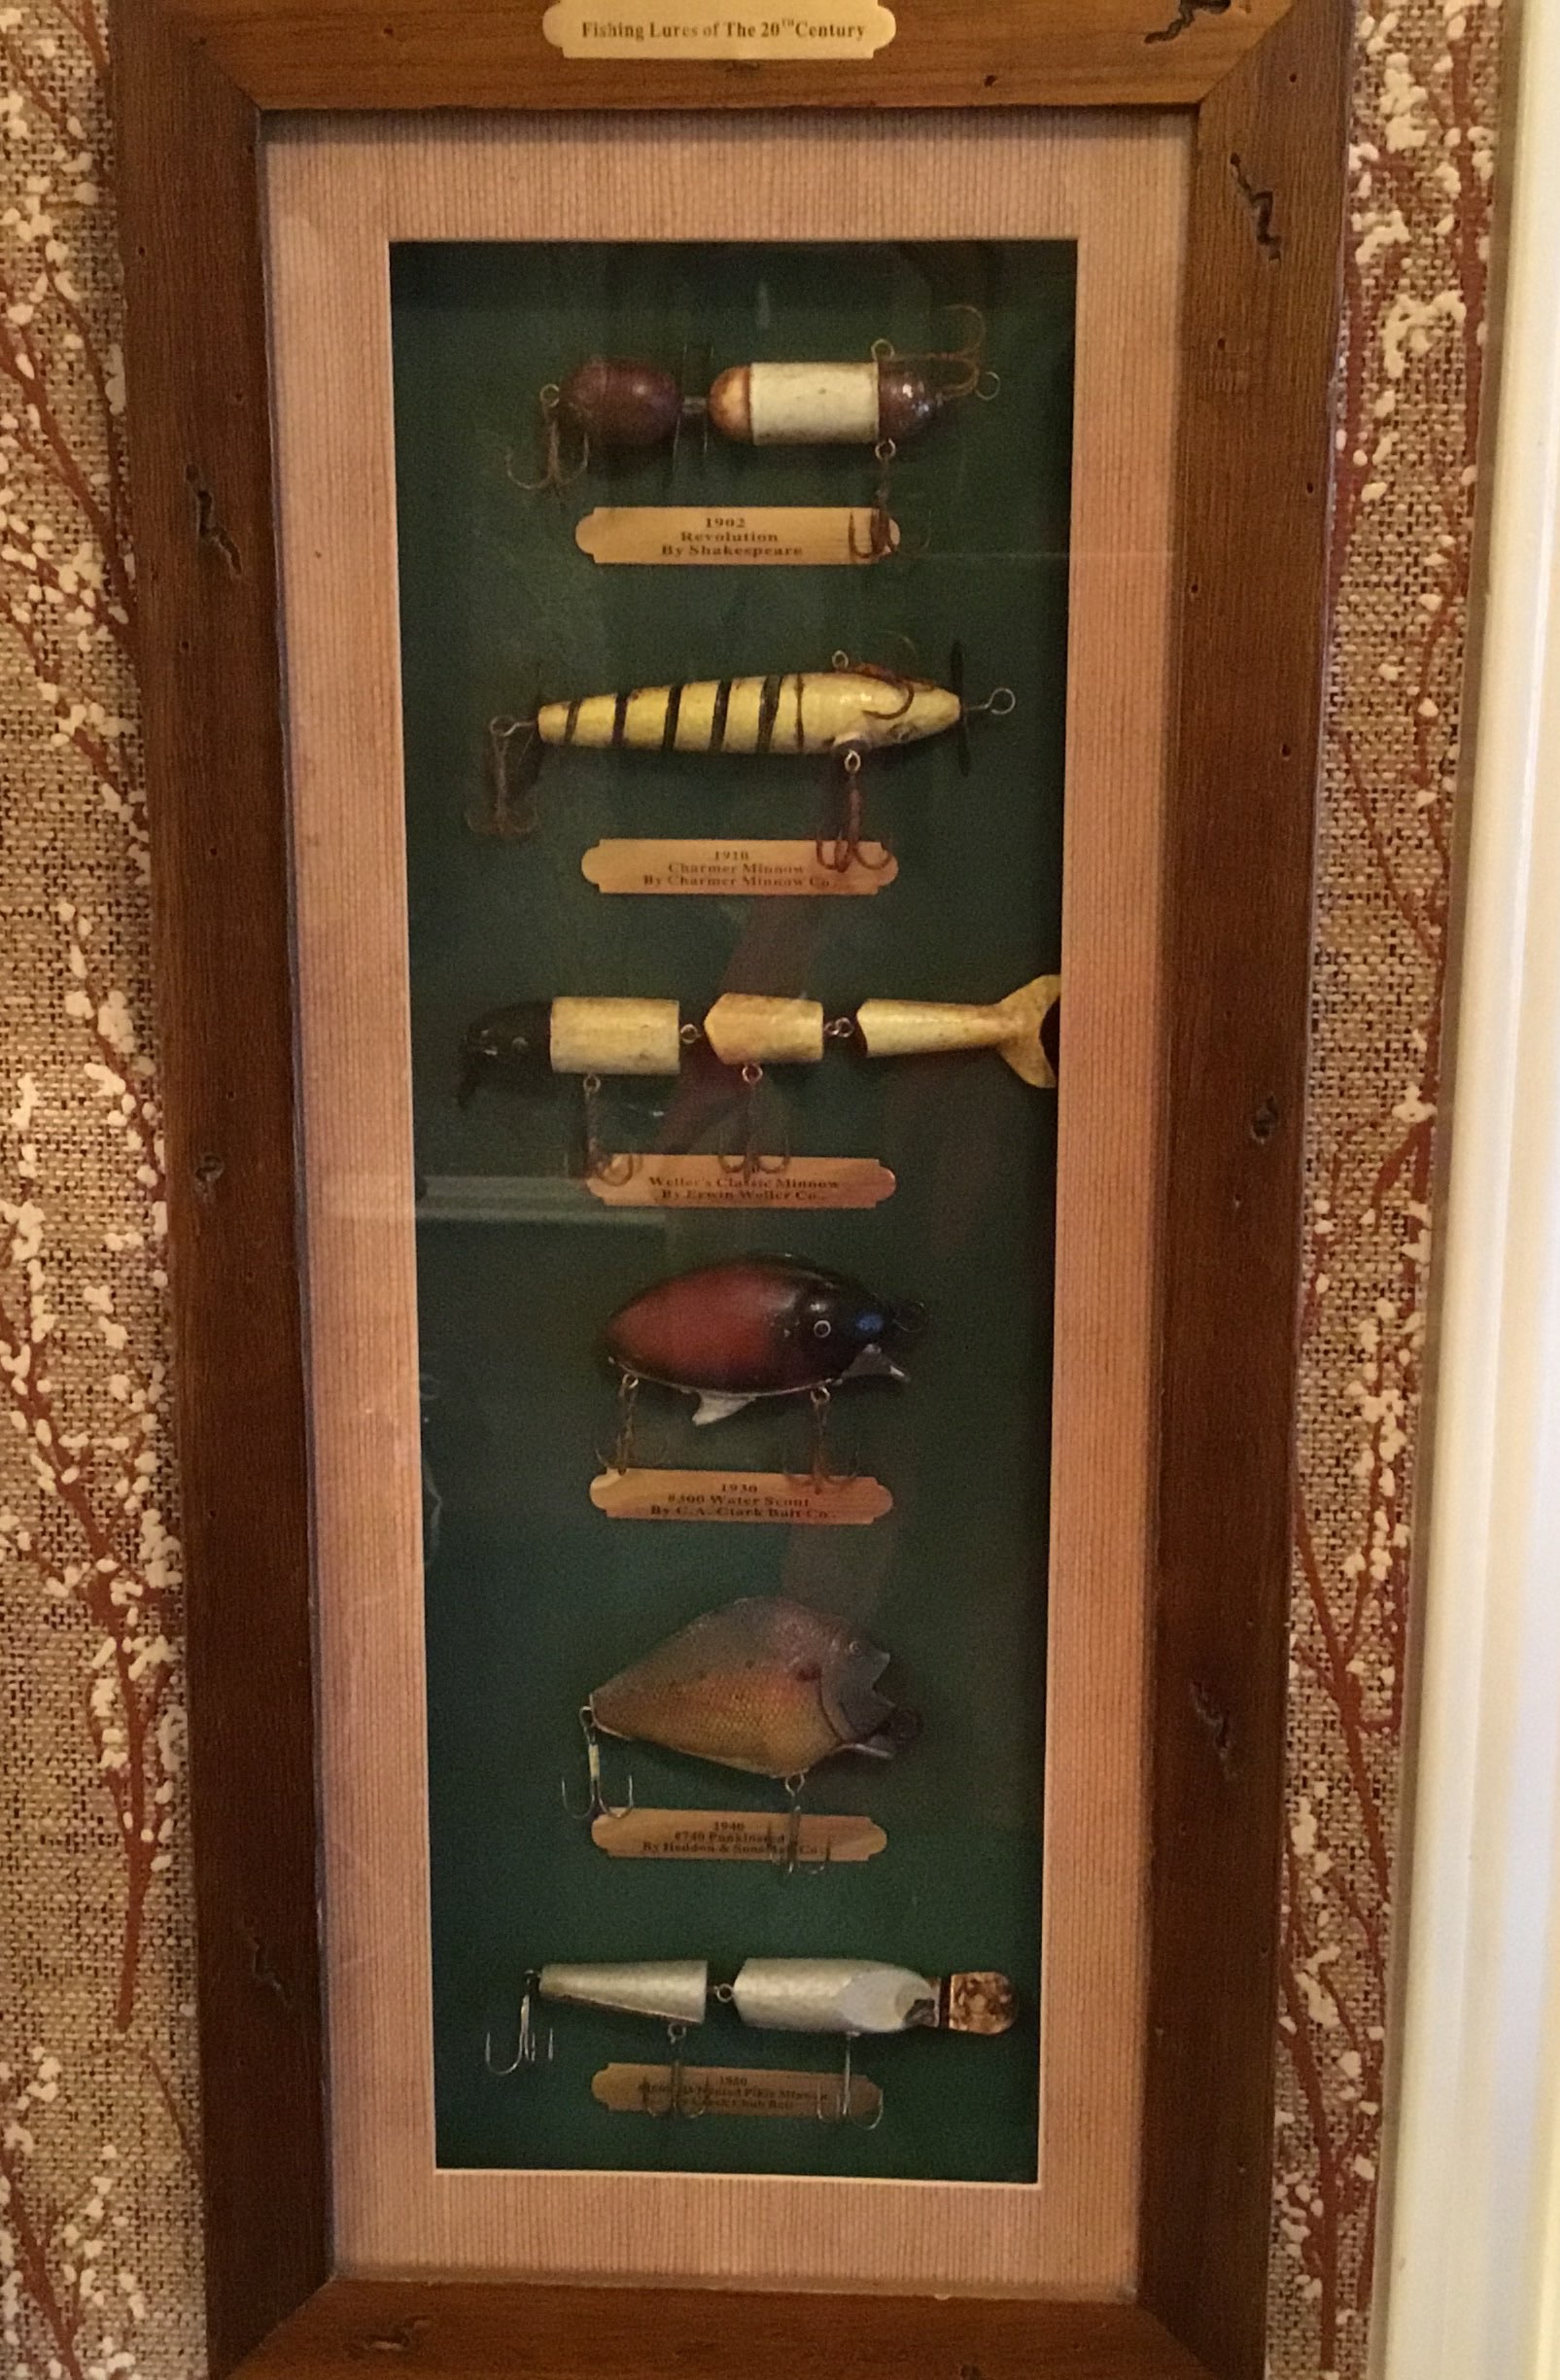 Fishing-Lures-Of-The-20th-Century